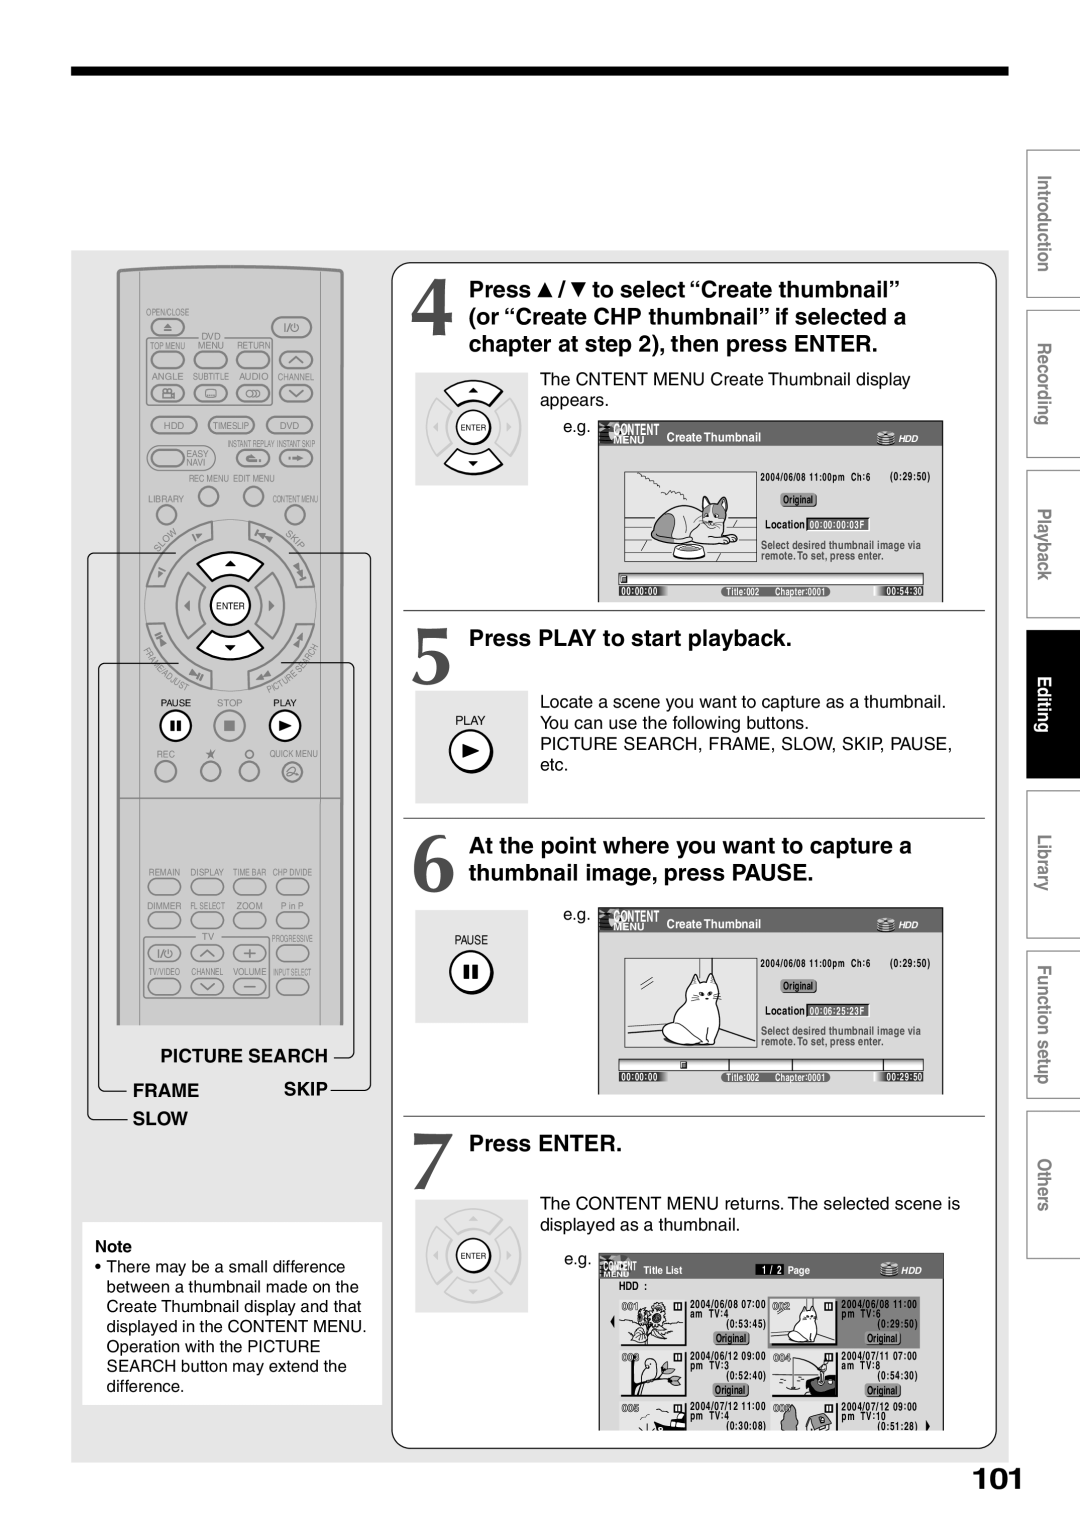 Toshiba RD-XS32SU Press PLAY to start playback, Picture Search Frame Skip Slow, Press ENTER, Library Function setup Others 